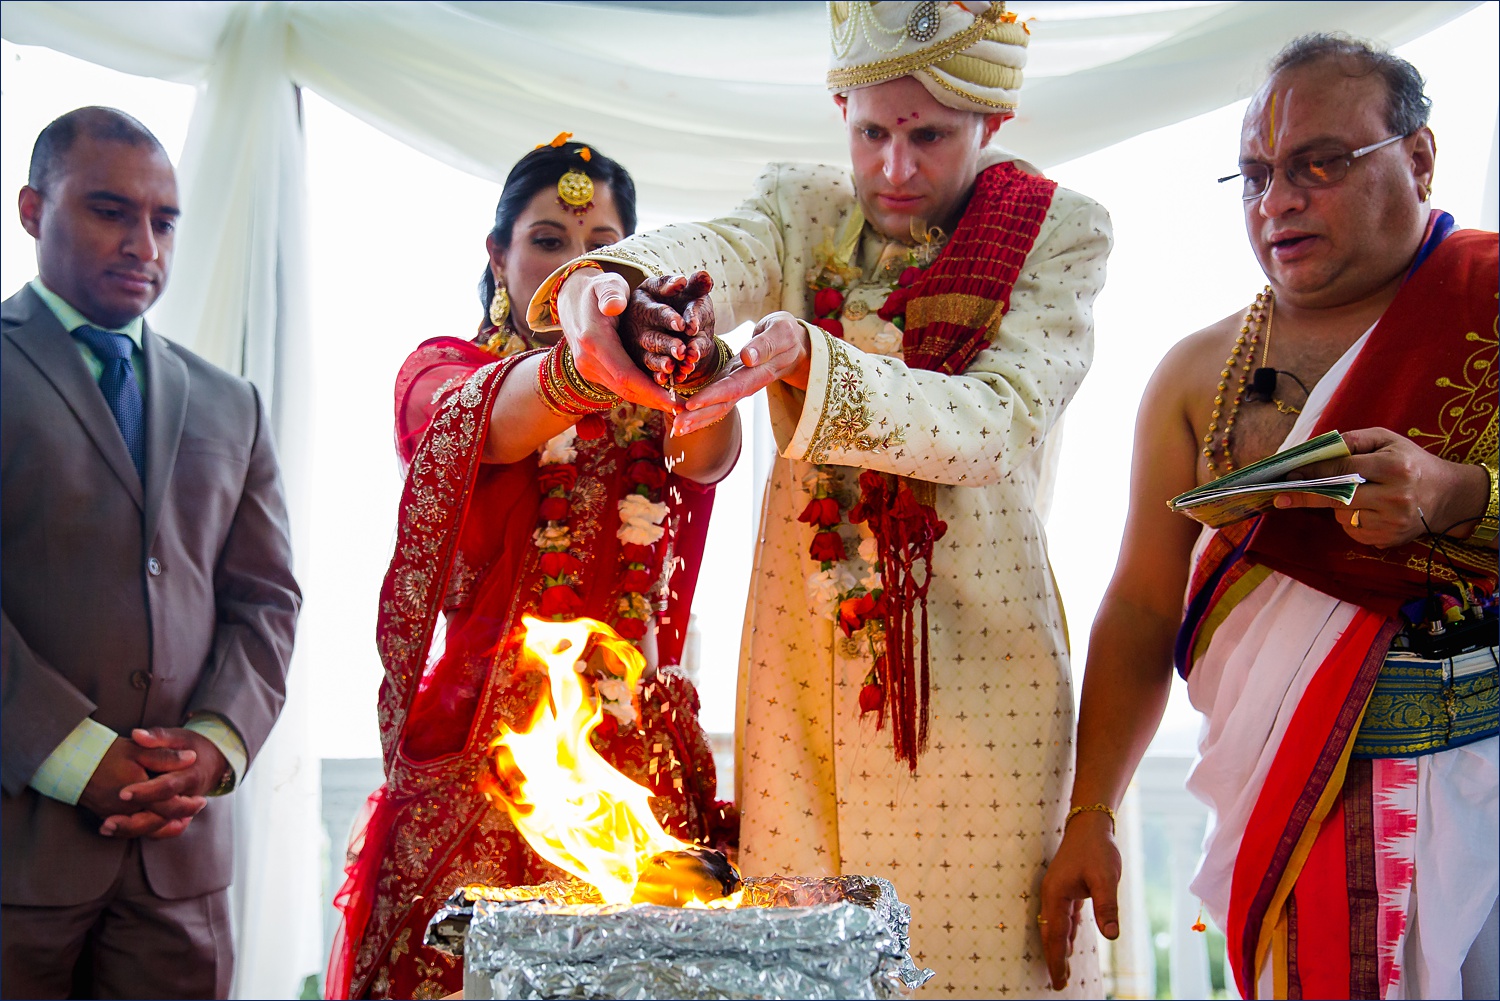 Saat Phere and Laja Homa putting rice in the ceremonial fire for the Hindu wedding in NH